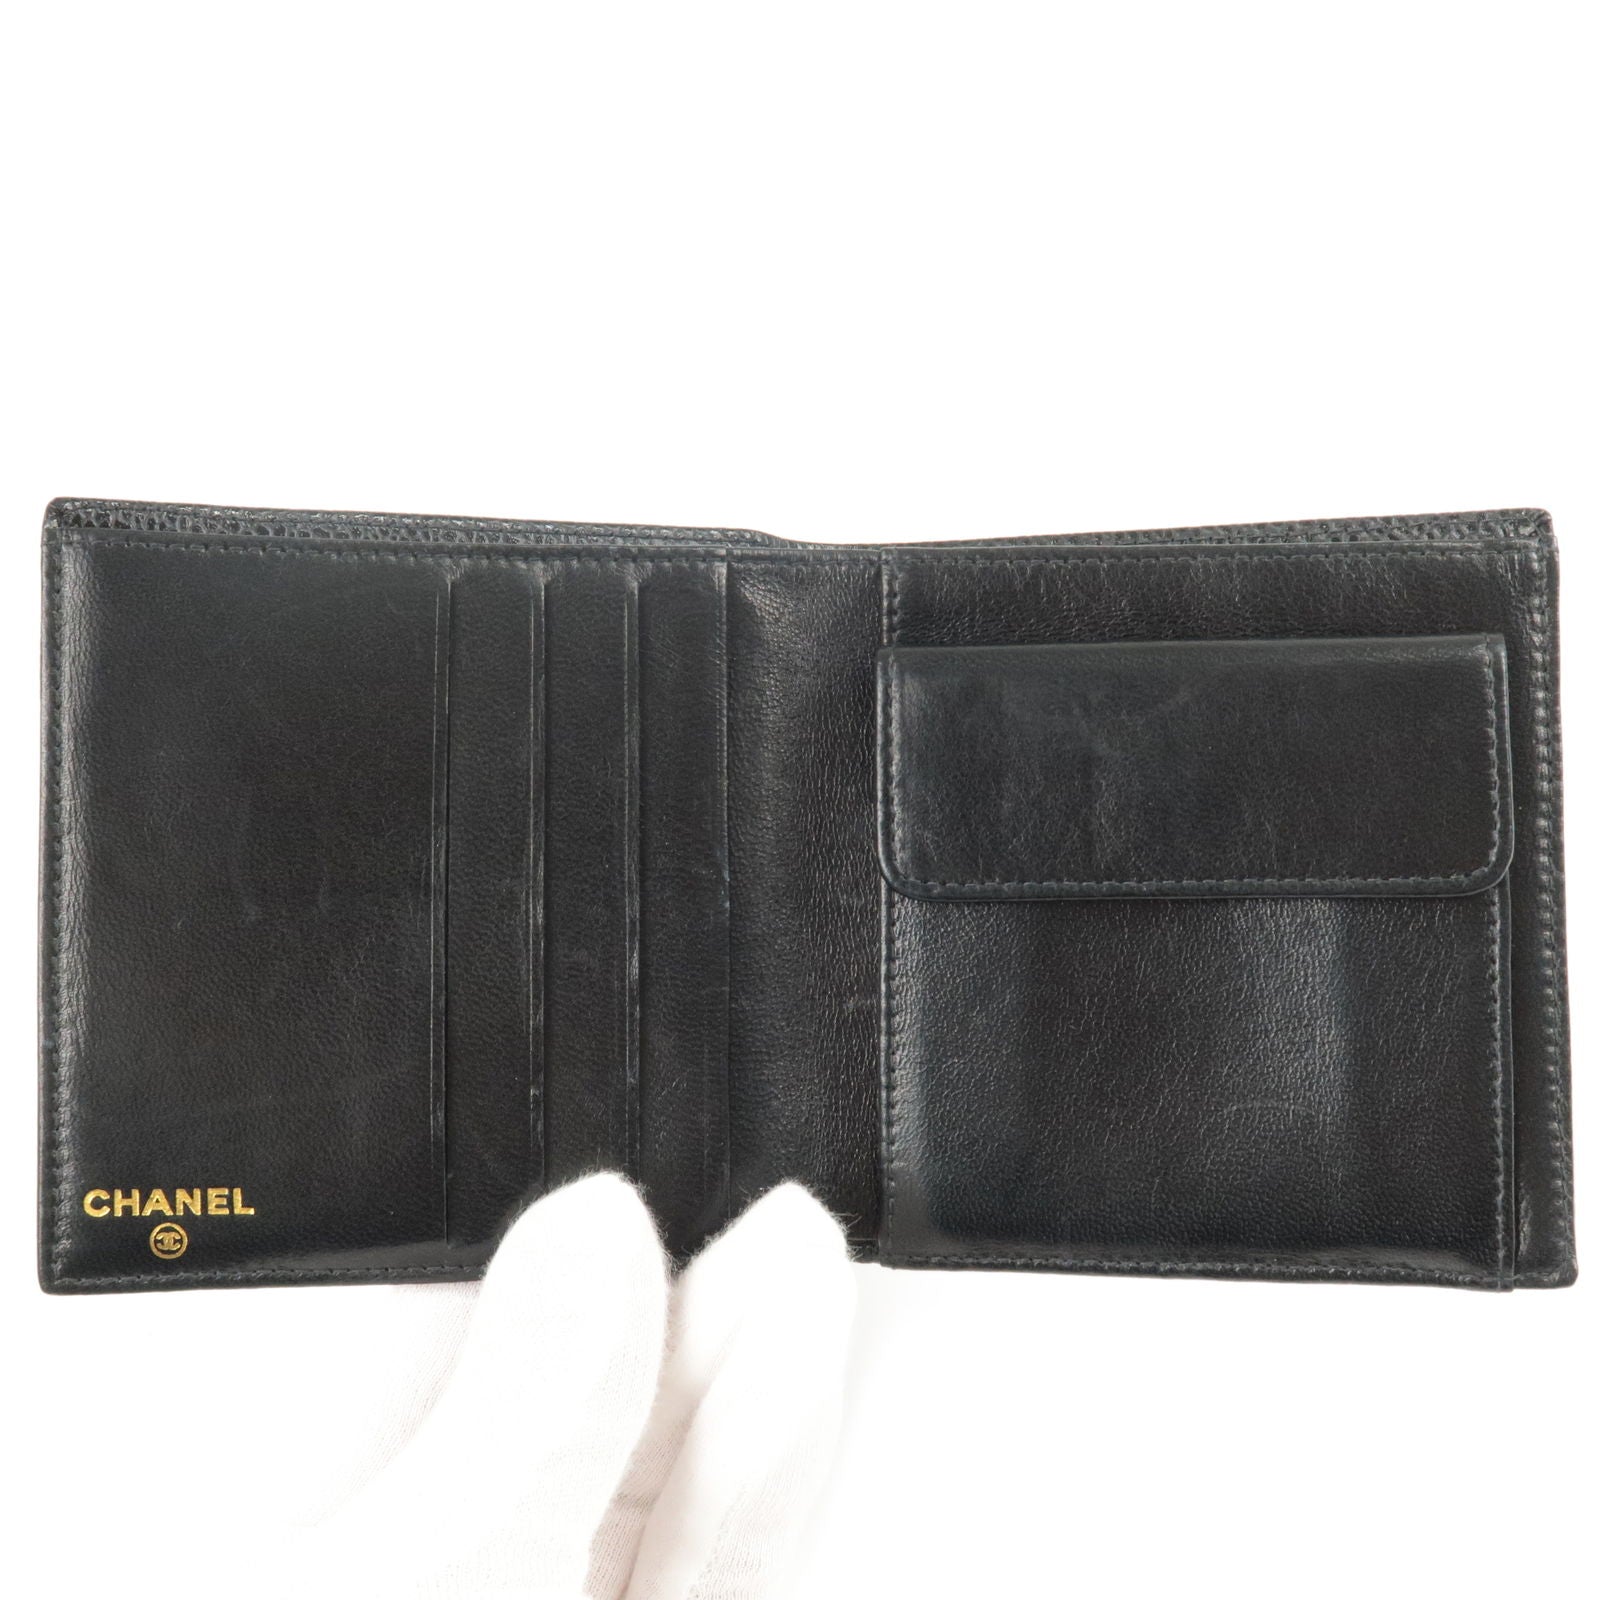 Mark - A13507 – dct - Caviar - Small - Wallet - Skin - ep_vintage